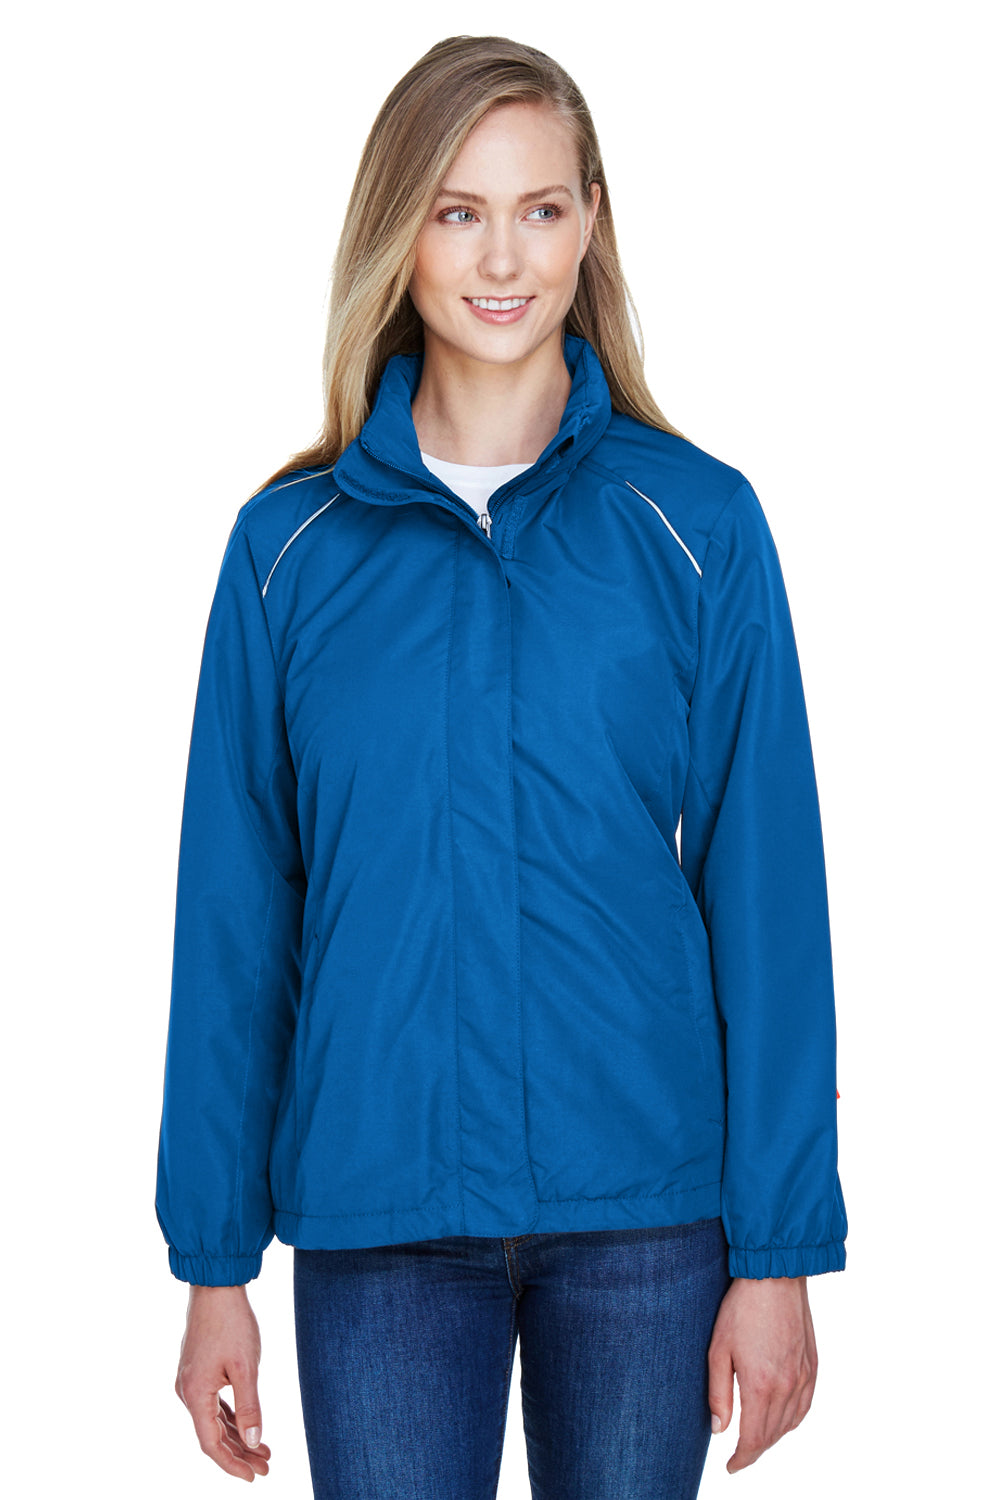 Core 365 78224 Womens Profile Water Resistant Full Zip Hooded Jacket Royal Blue Front